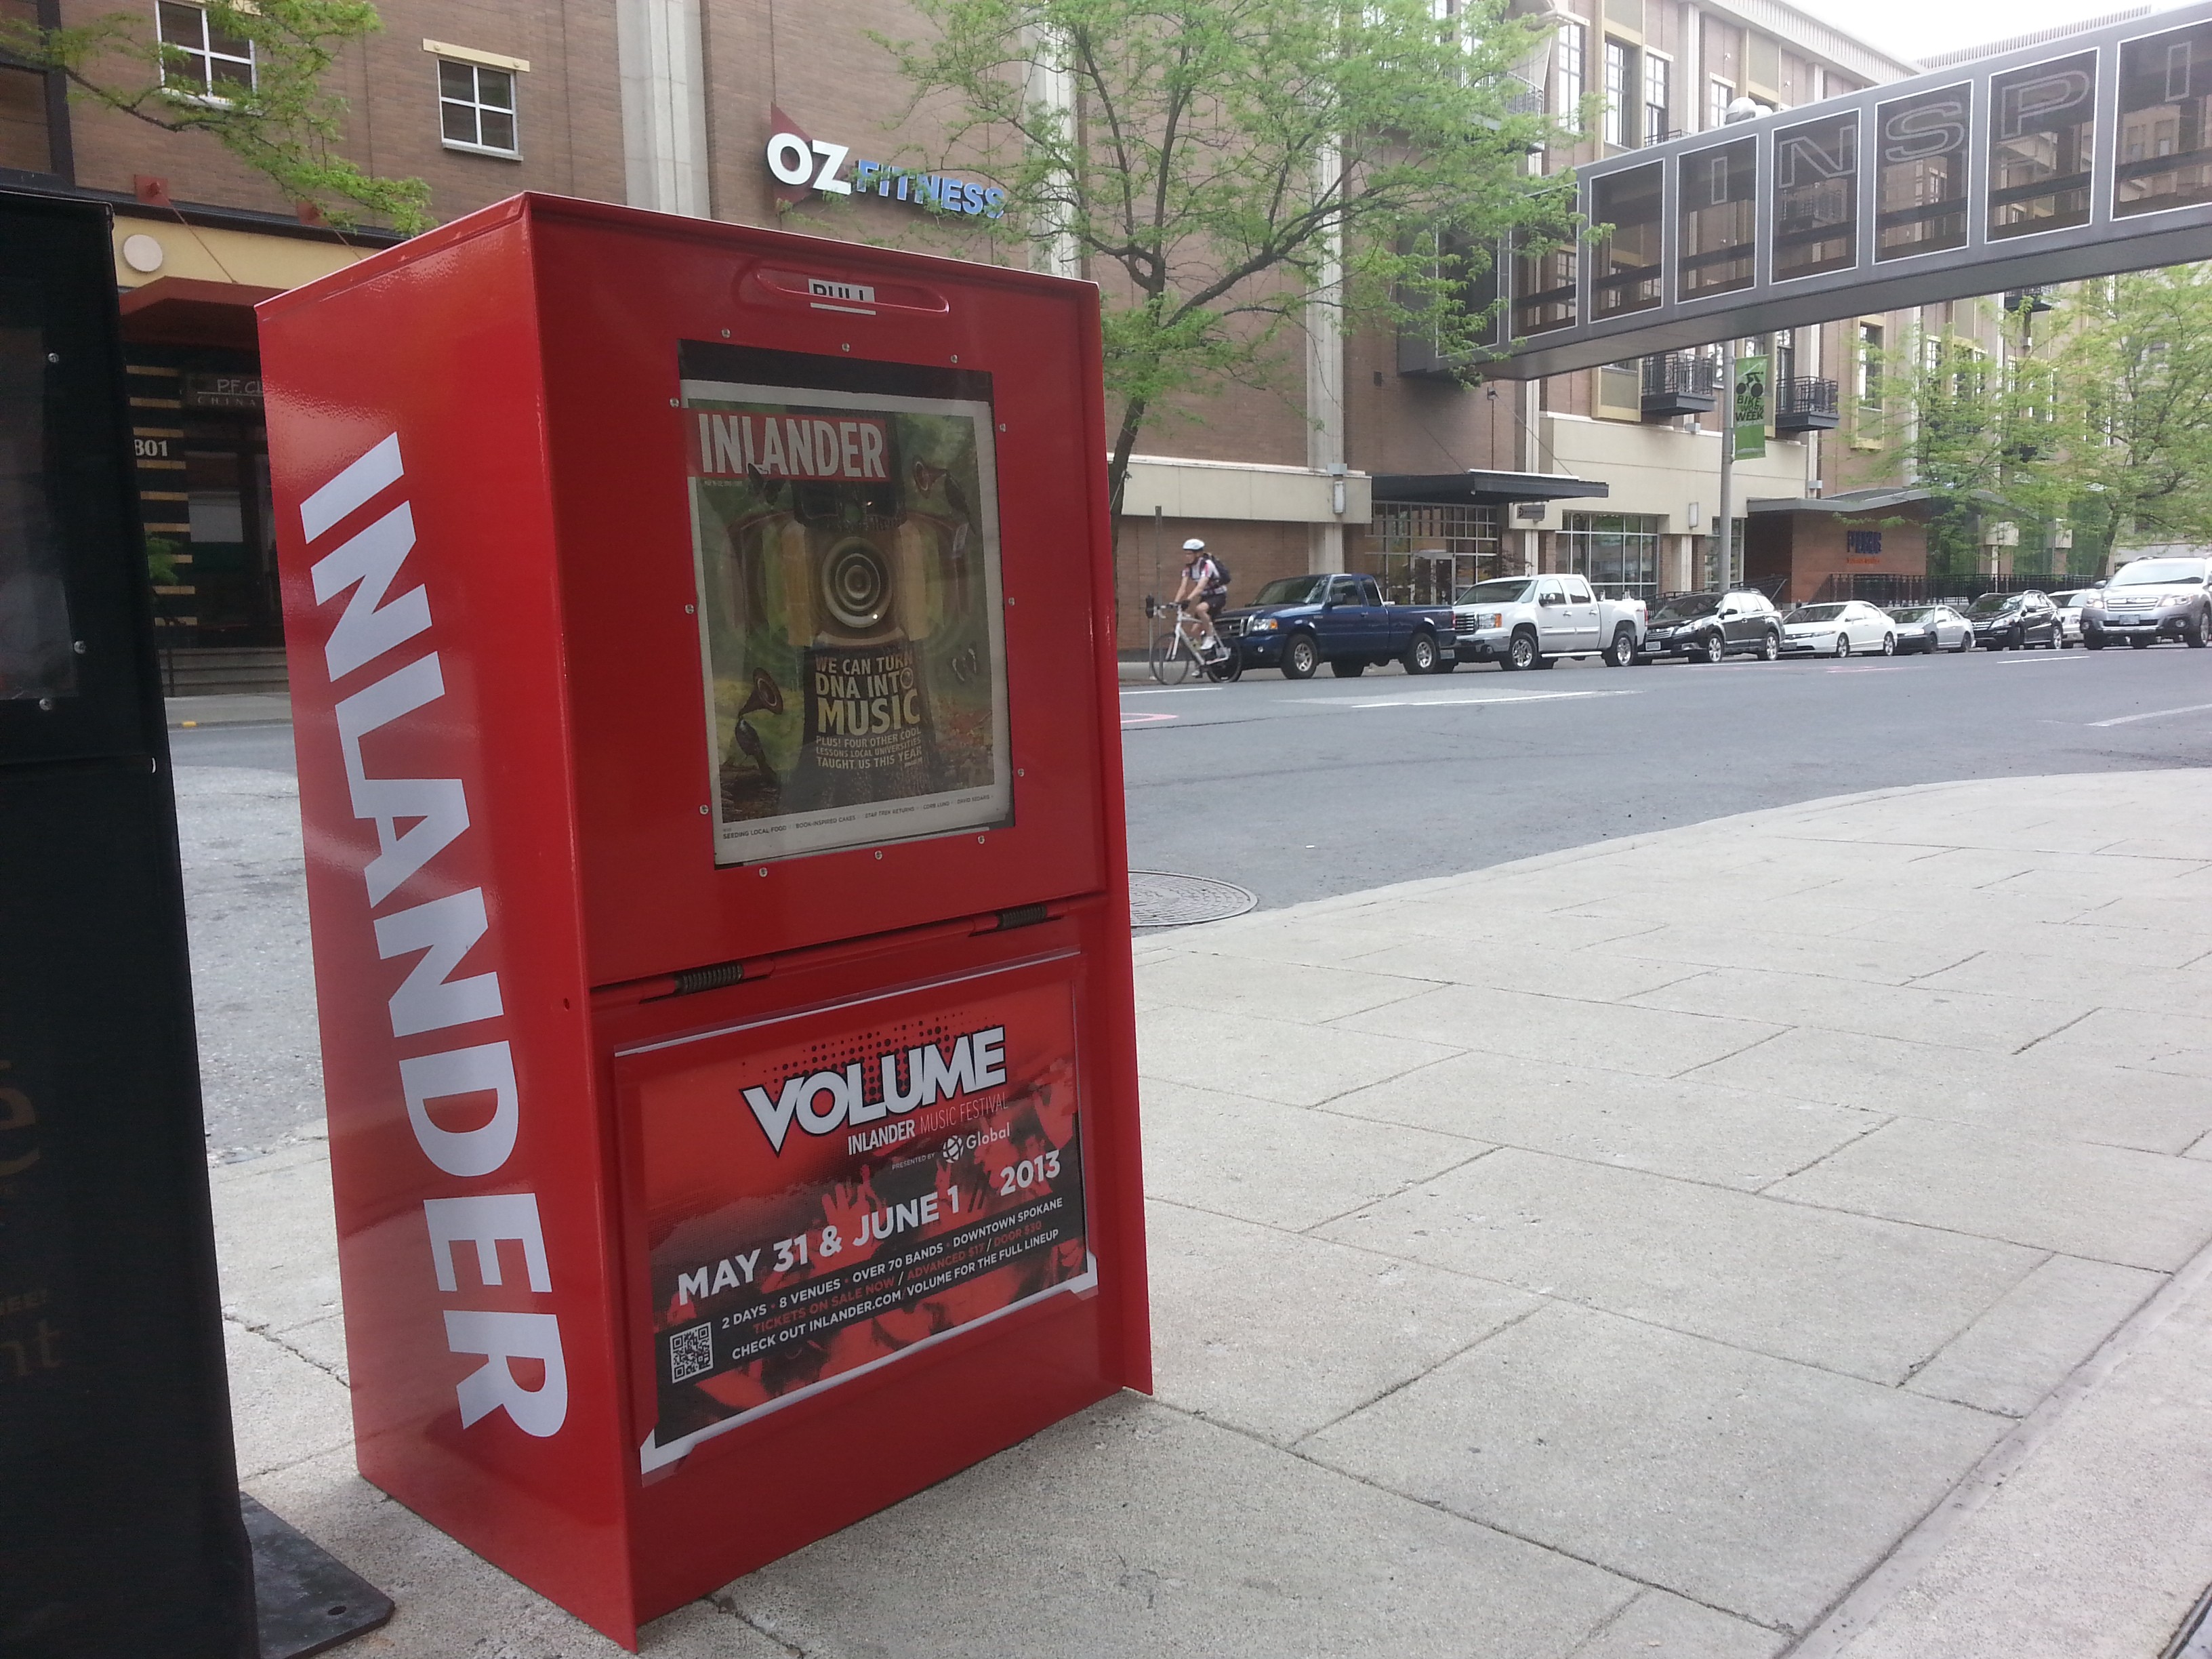 Look for our new distribution boxes in downtown Spokane